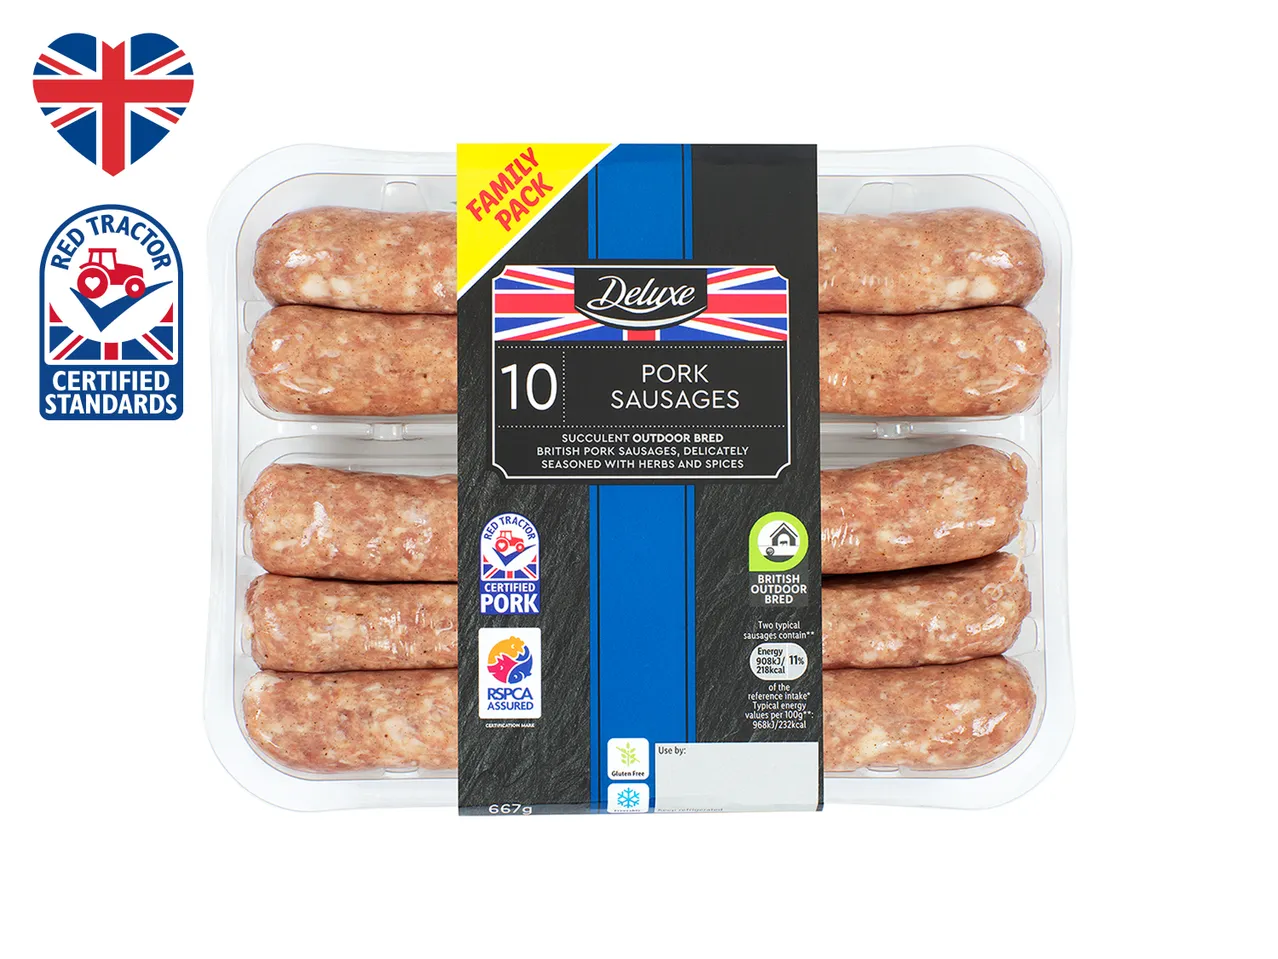 Go to full screen view: Deluxe RSPCA Pork Sausages - Image 1